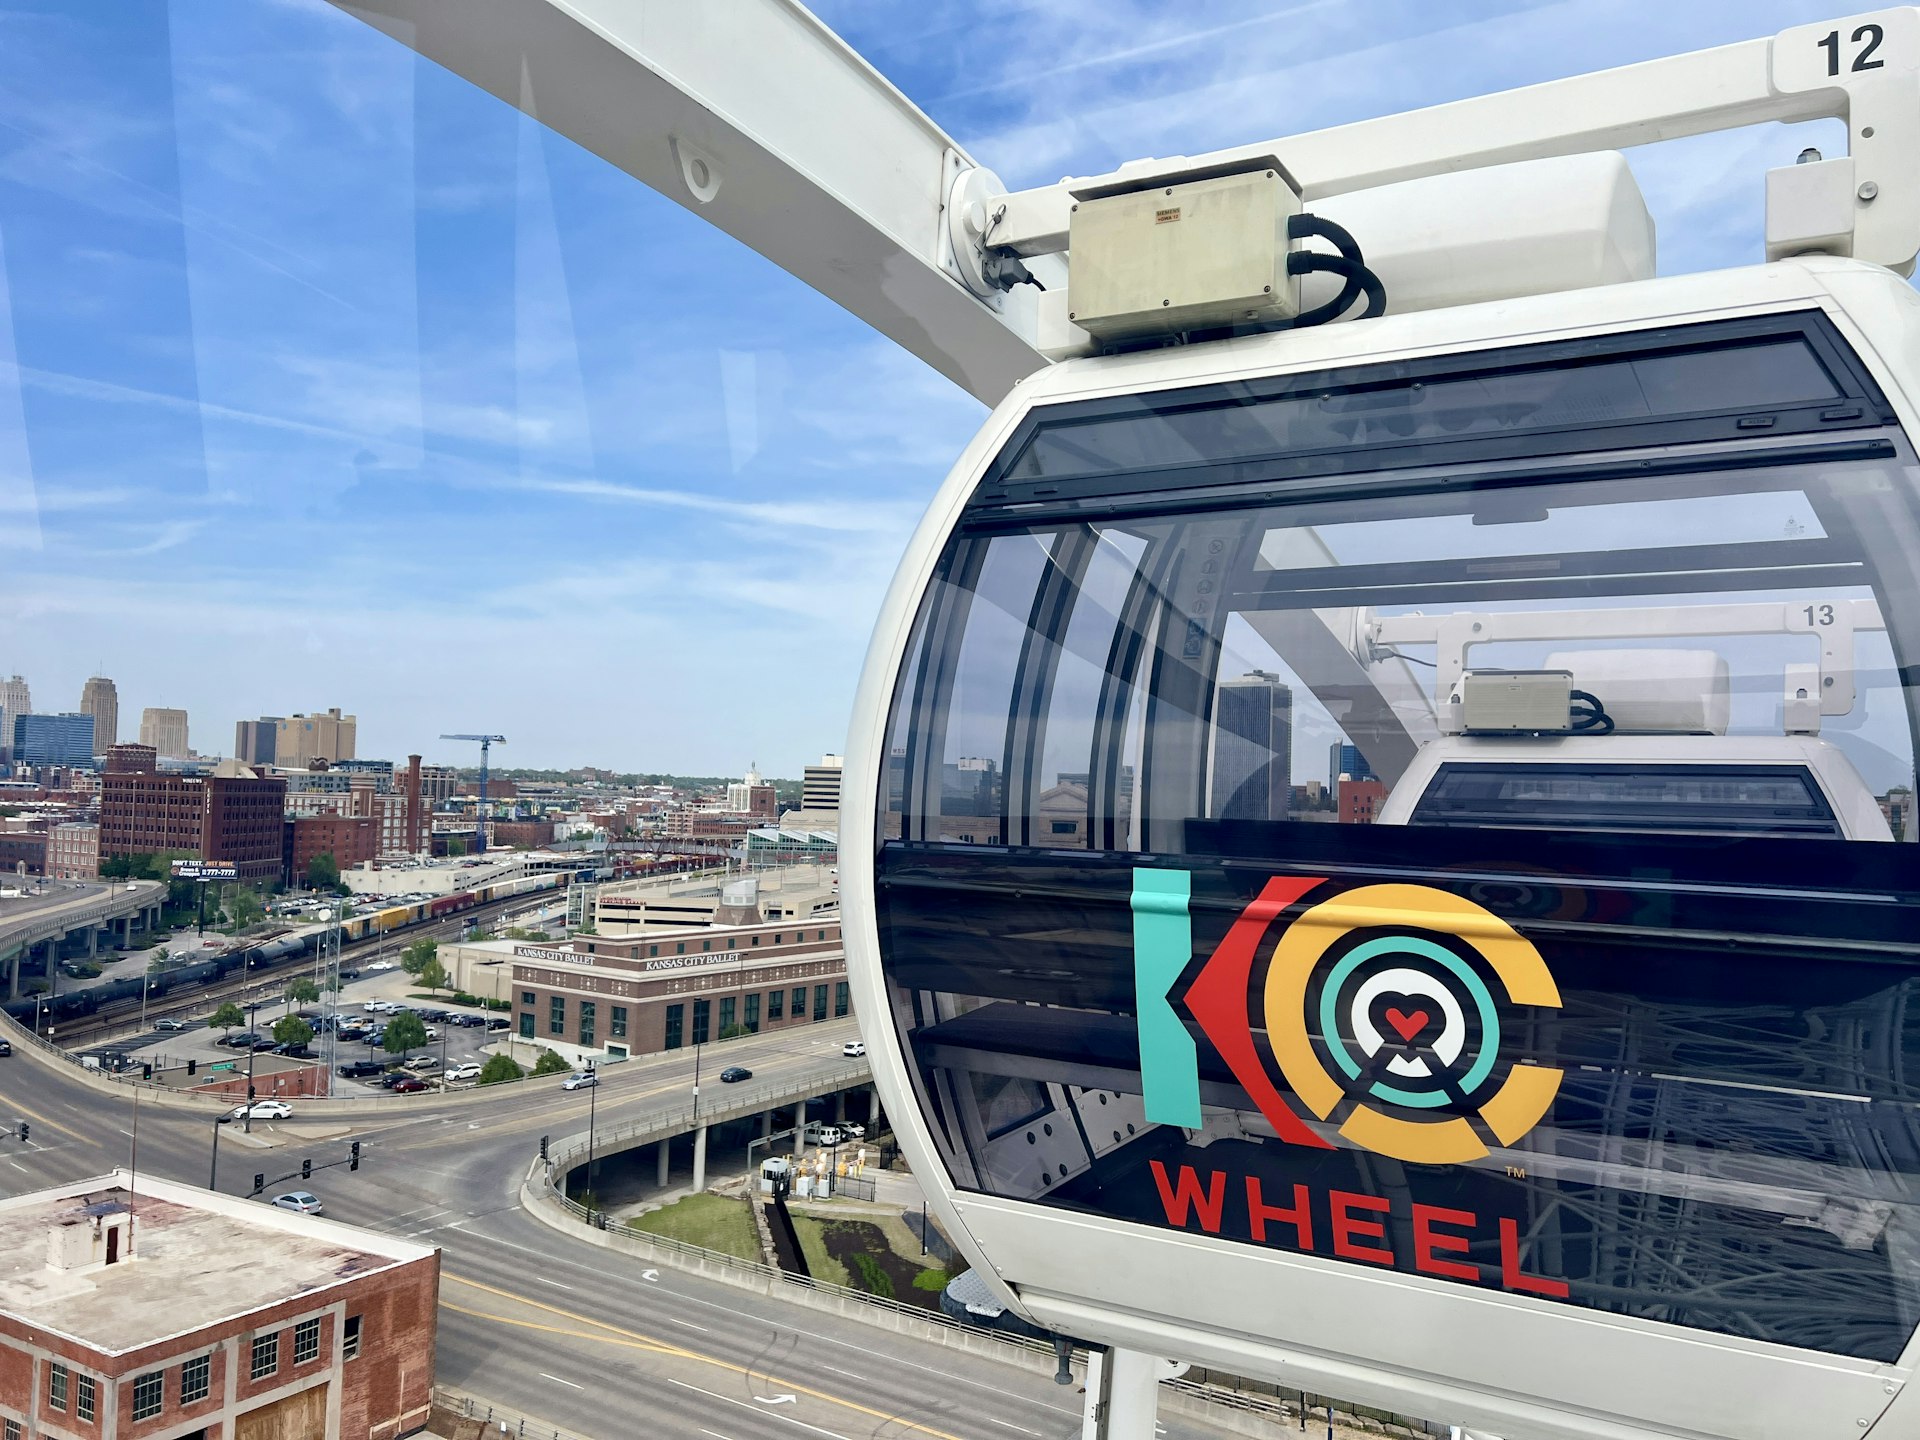 KC Wheel -- with a view of the city scape and another carriage